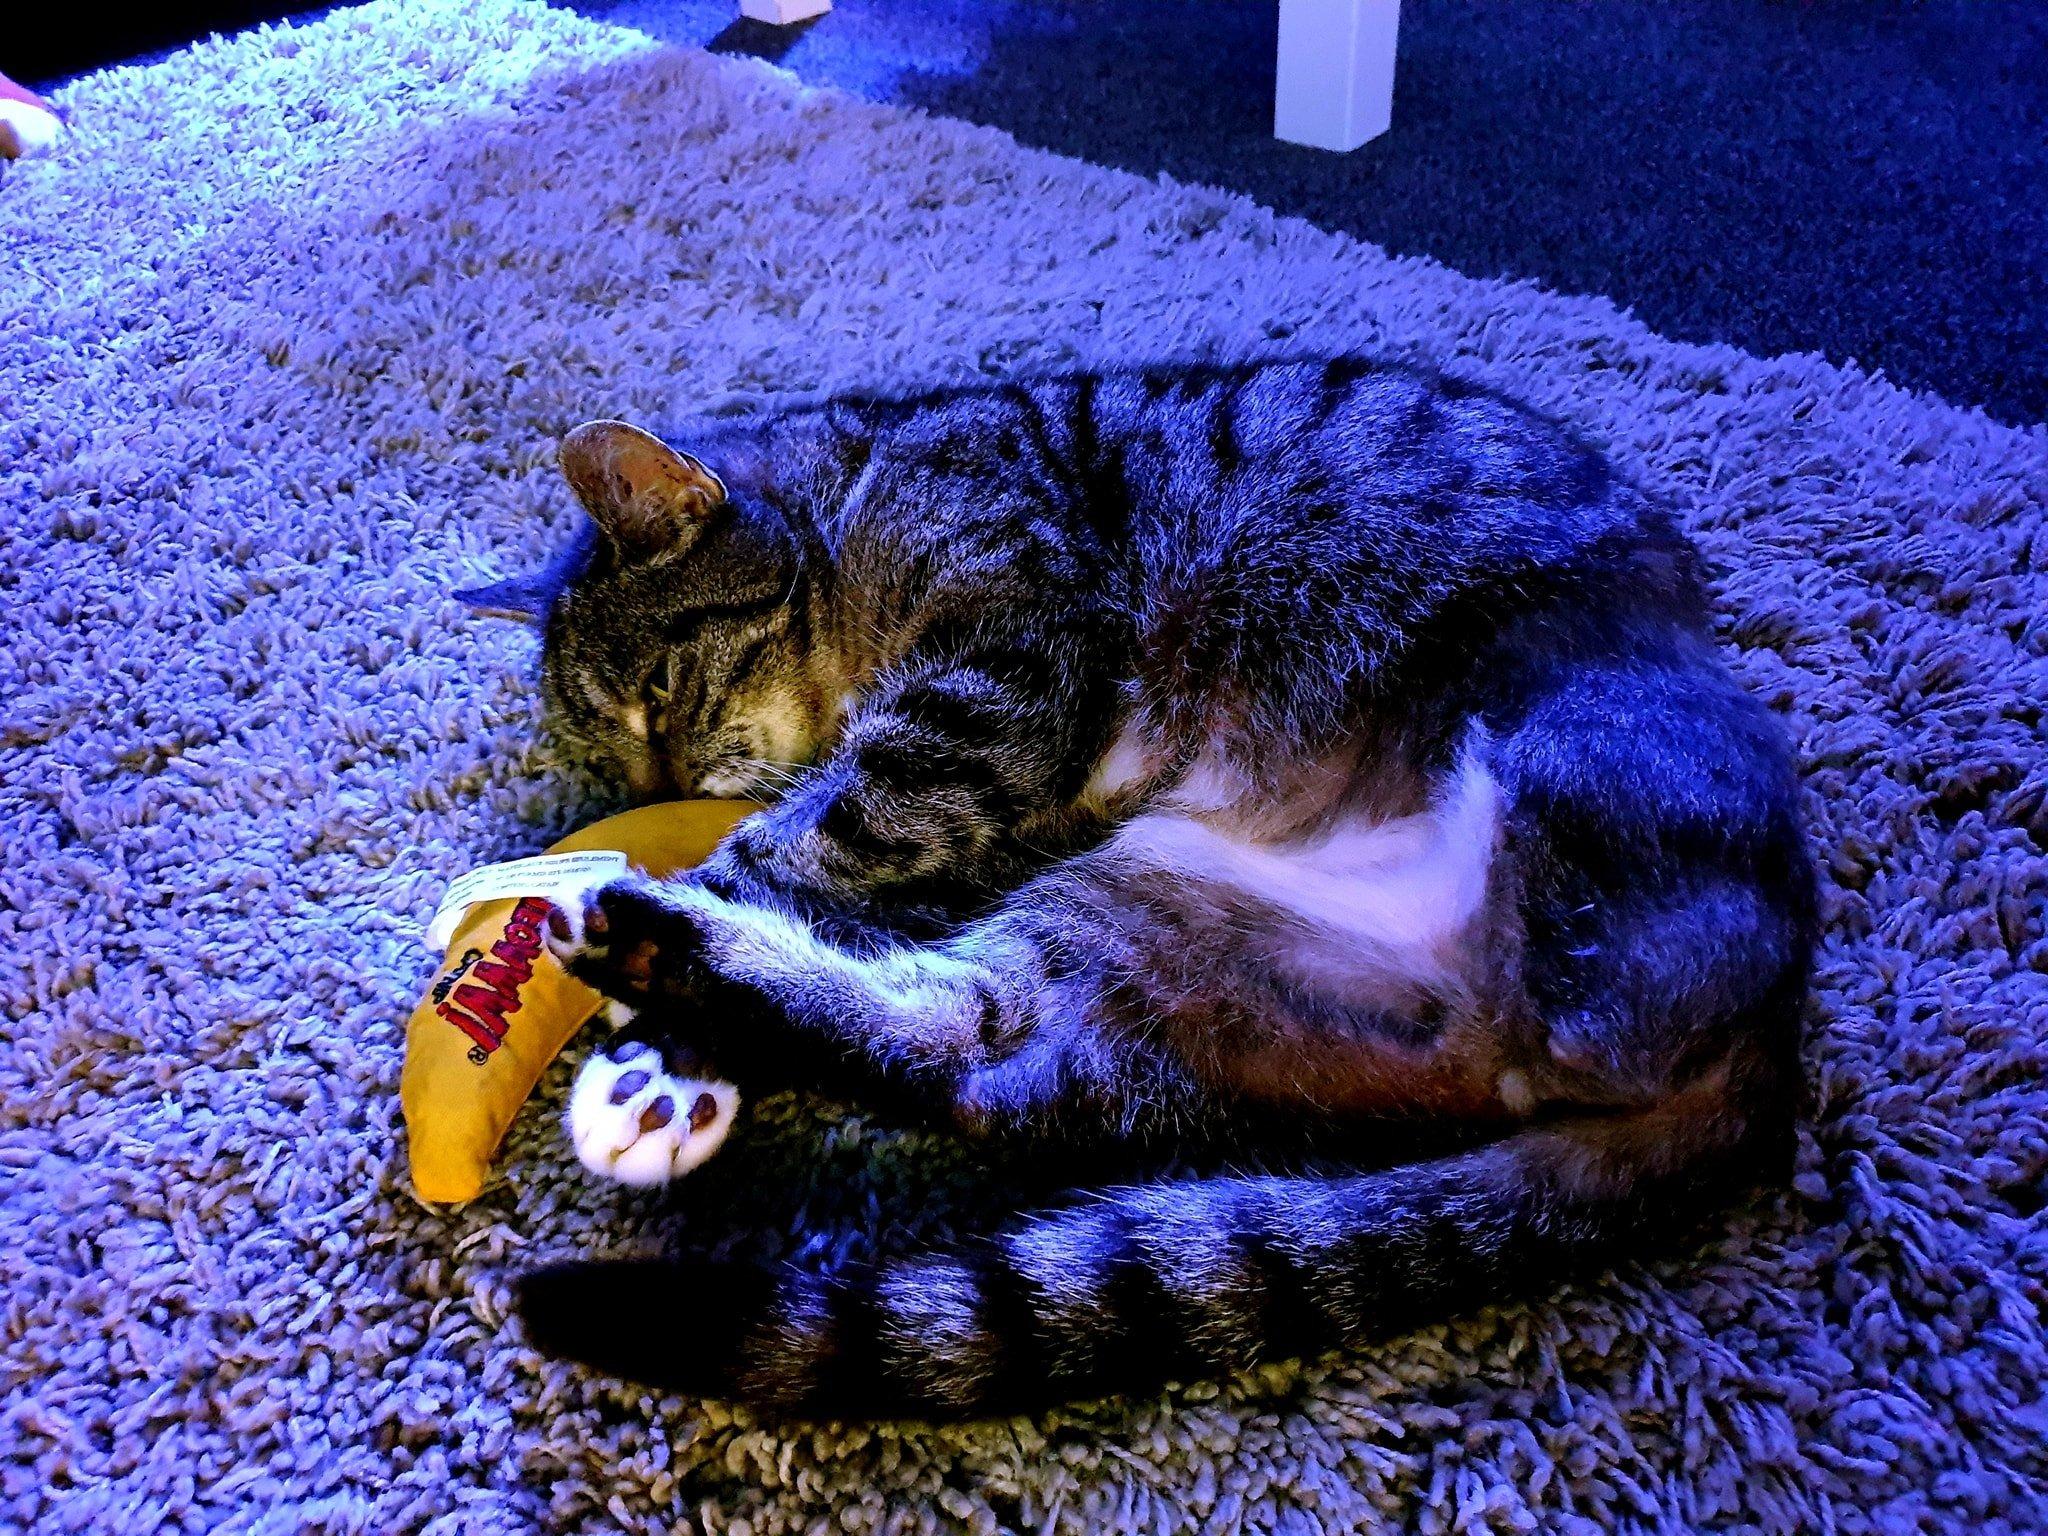 Miracle cat Sparkle curled up with a catnip toy after the operation to amputate his leg